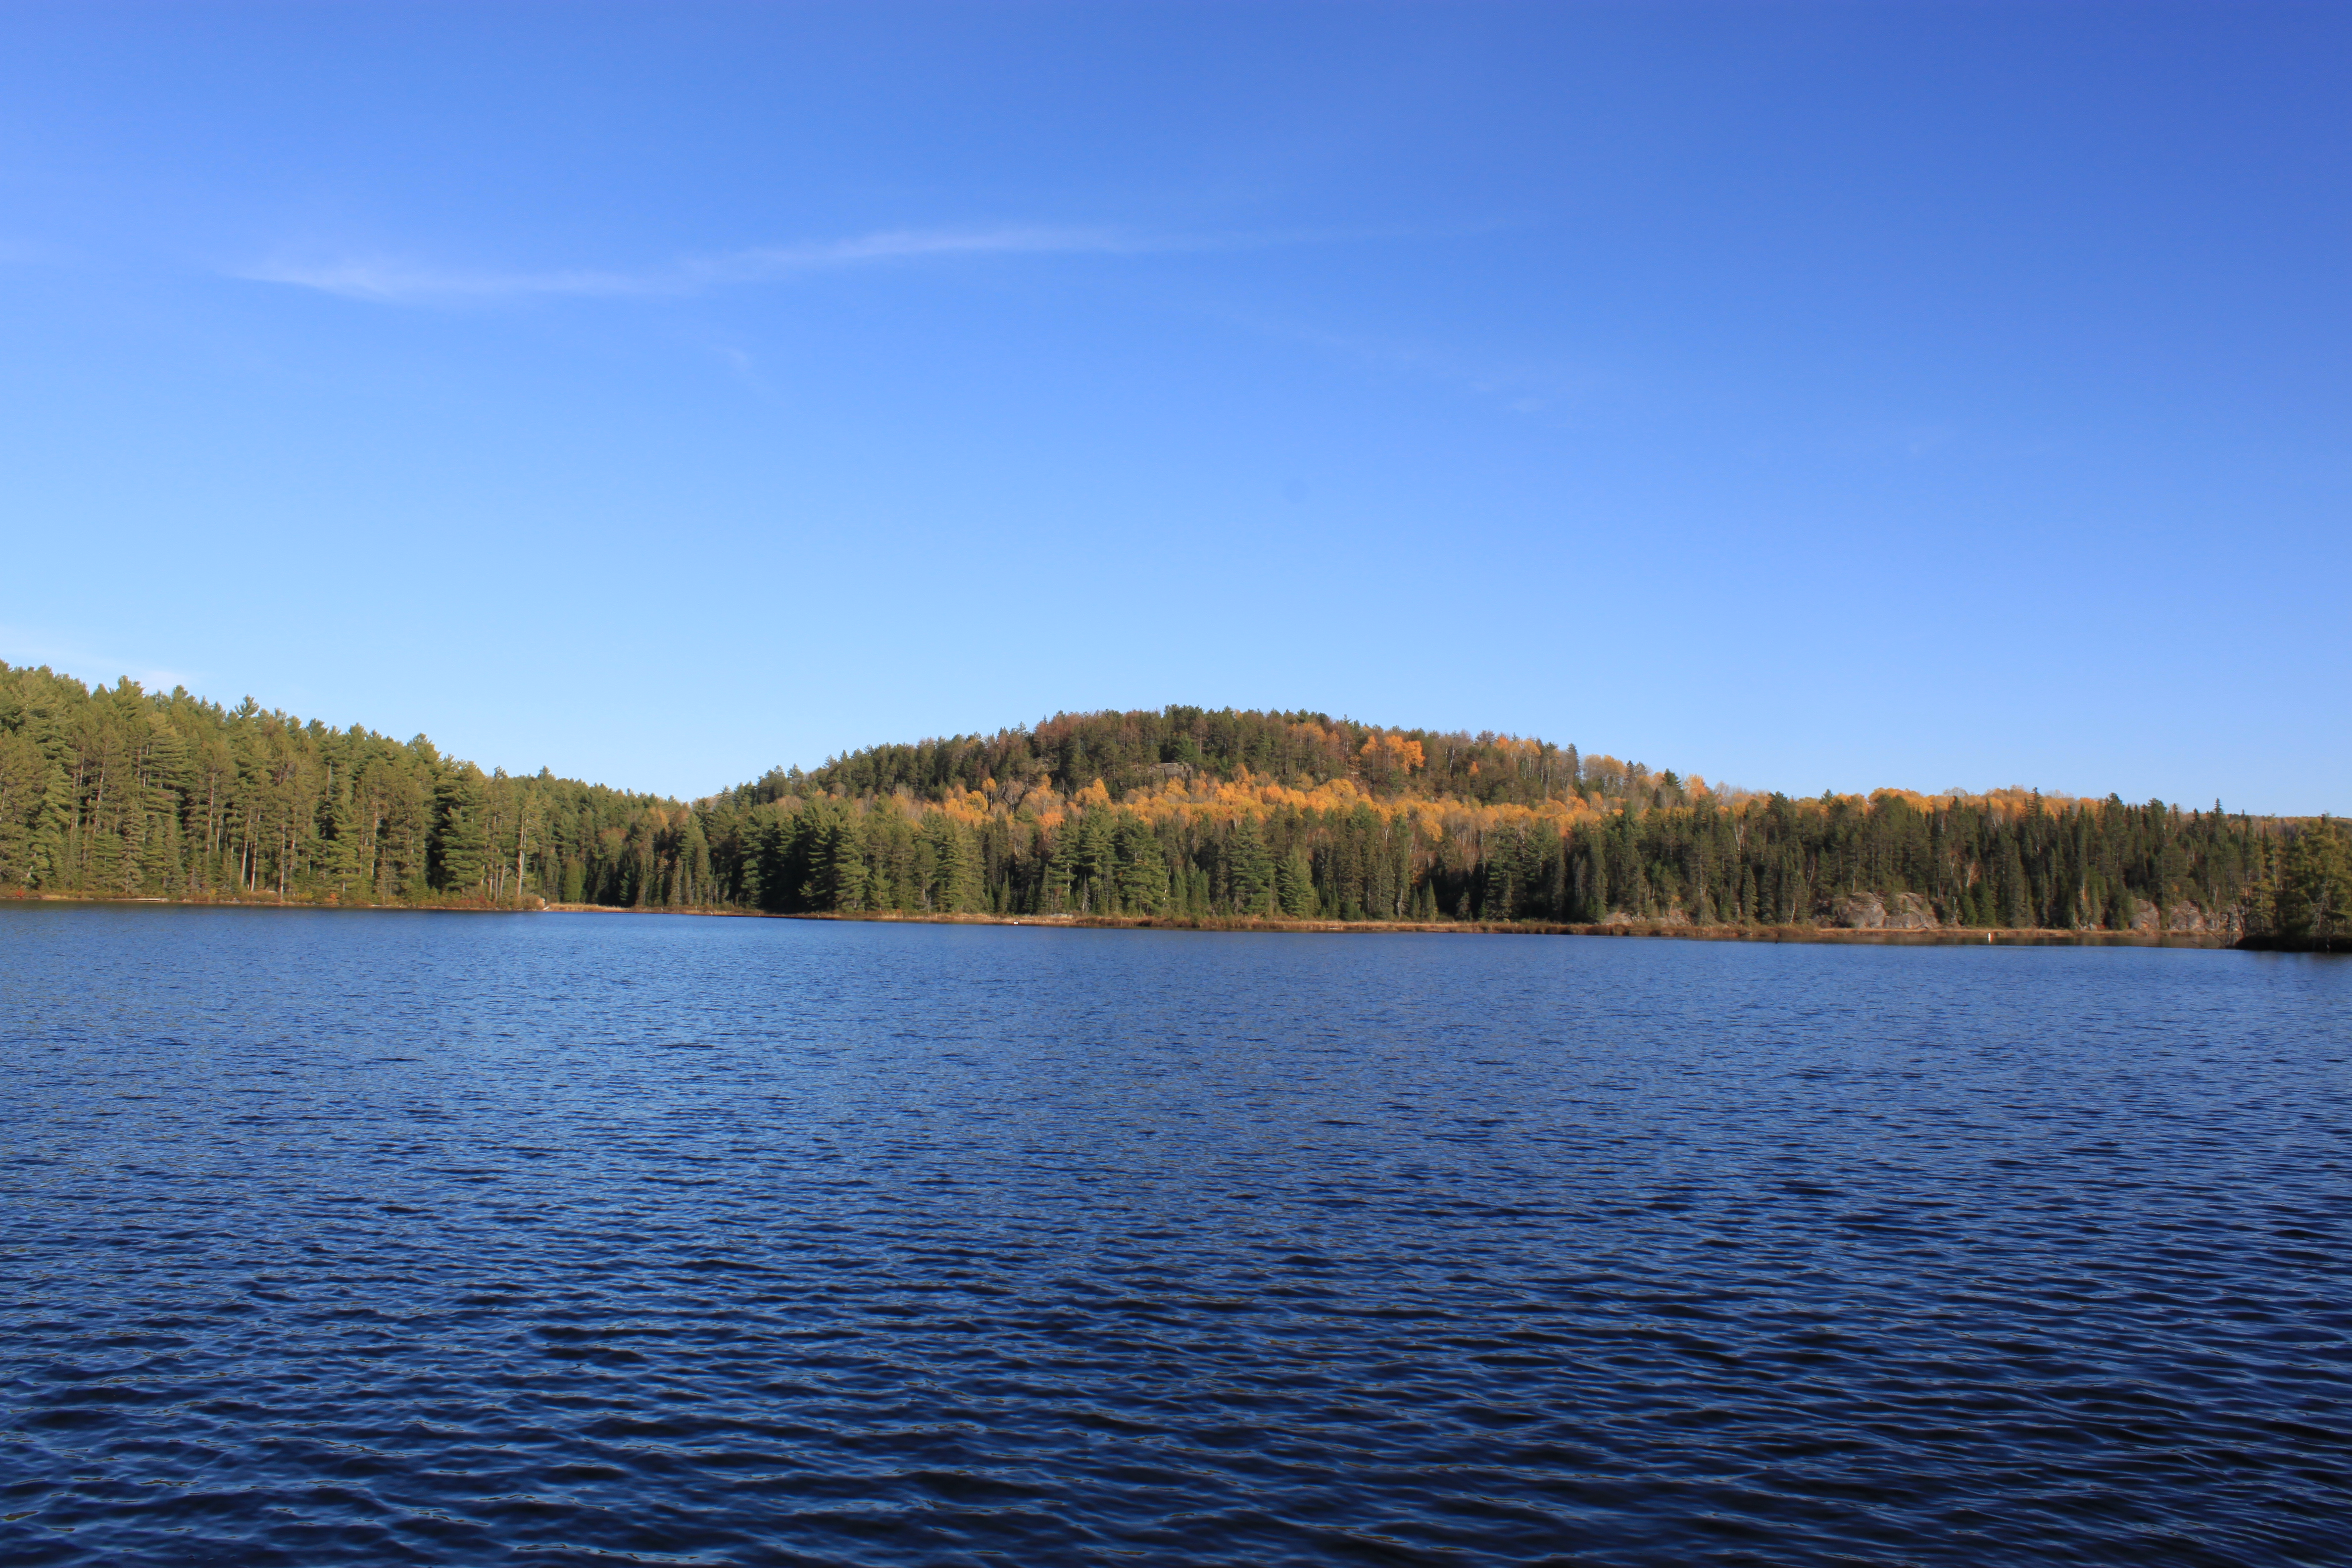 Lake Opengo, Algonquin Park. We discovered it while looking for gas.